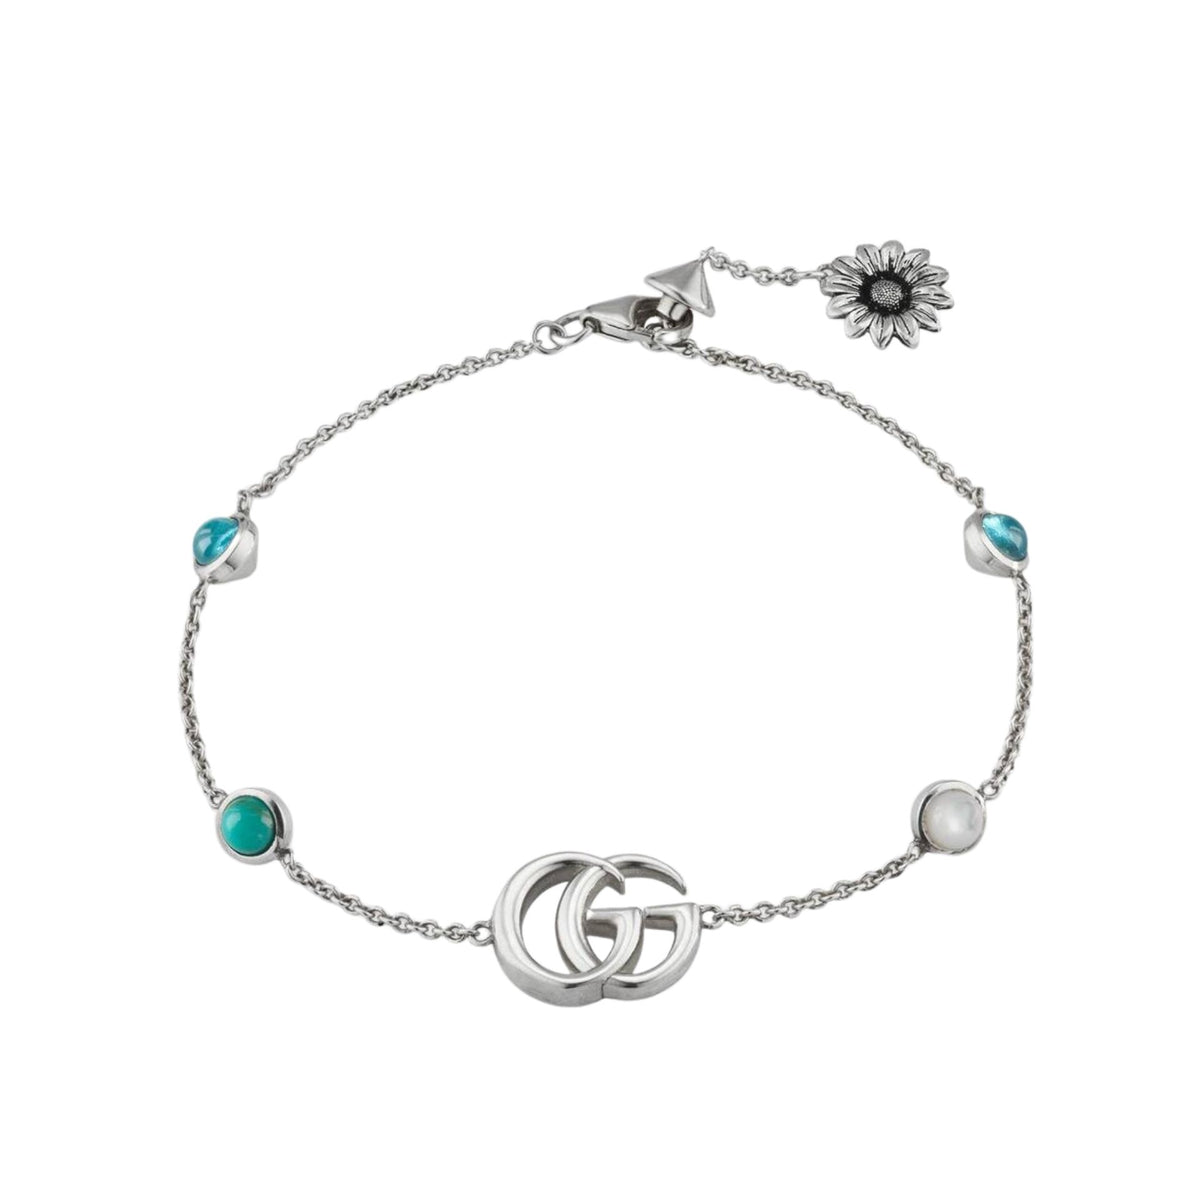 Gucci GG Marmont Bracelet Mother of Pearl, Blue Topaz and Turquoise Resin in Silver - Orsini Jewellers NZ